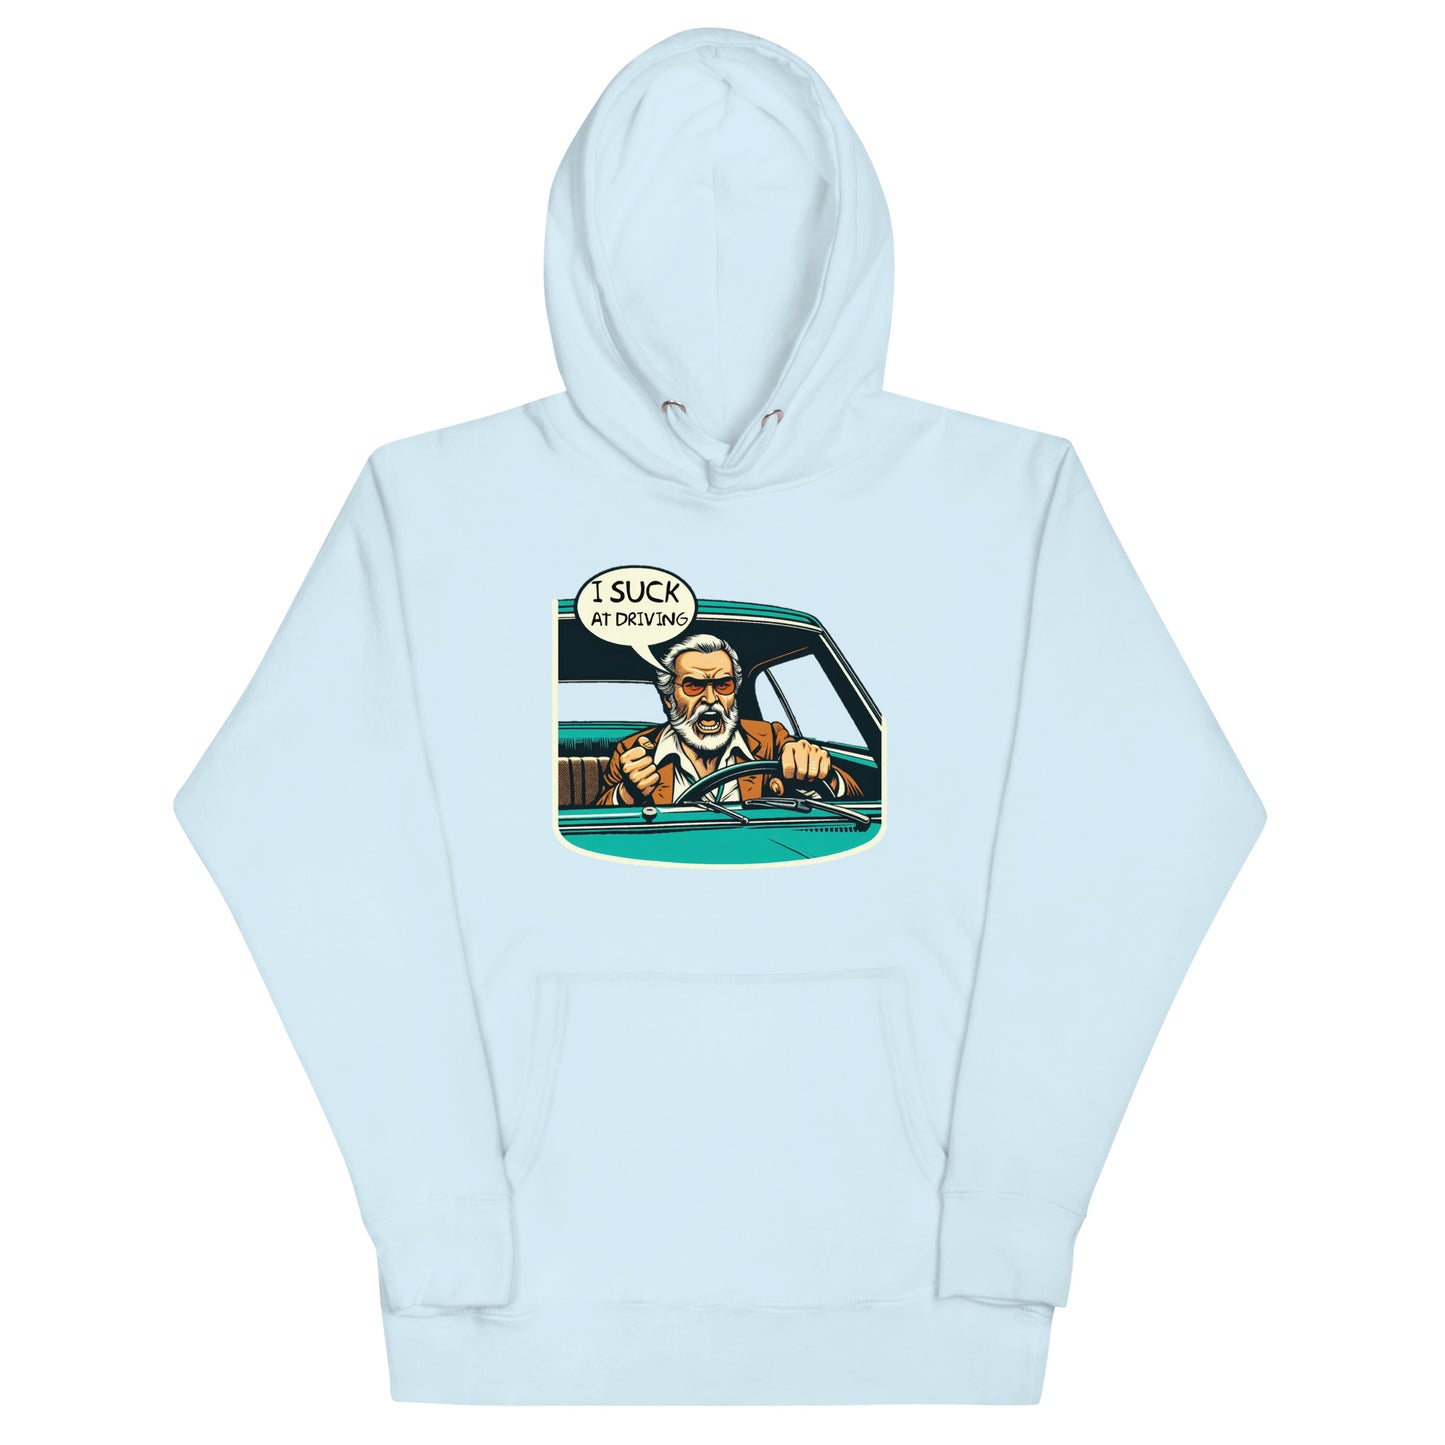 I Suck At Driving Hoodie